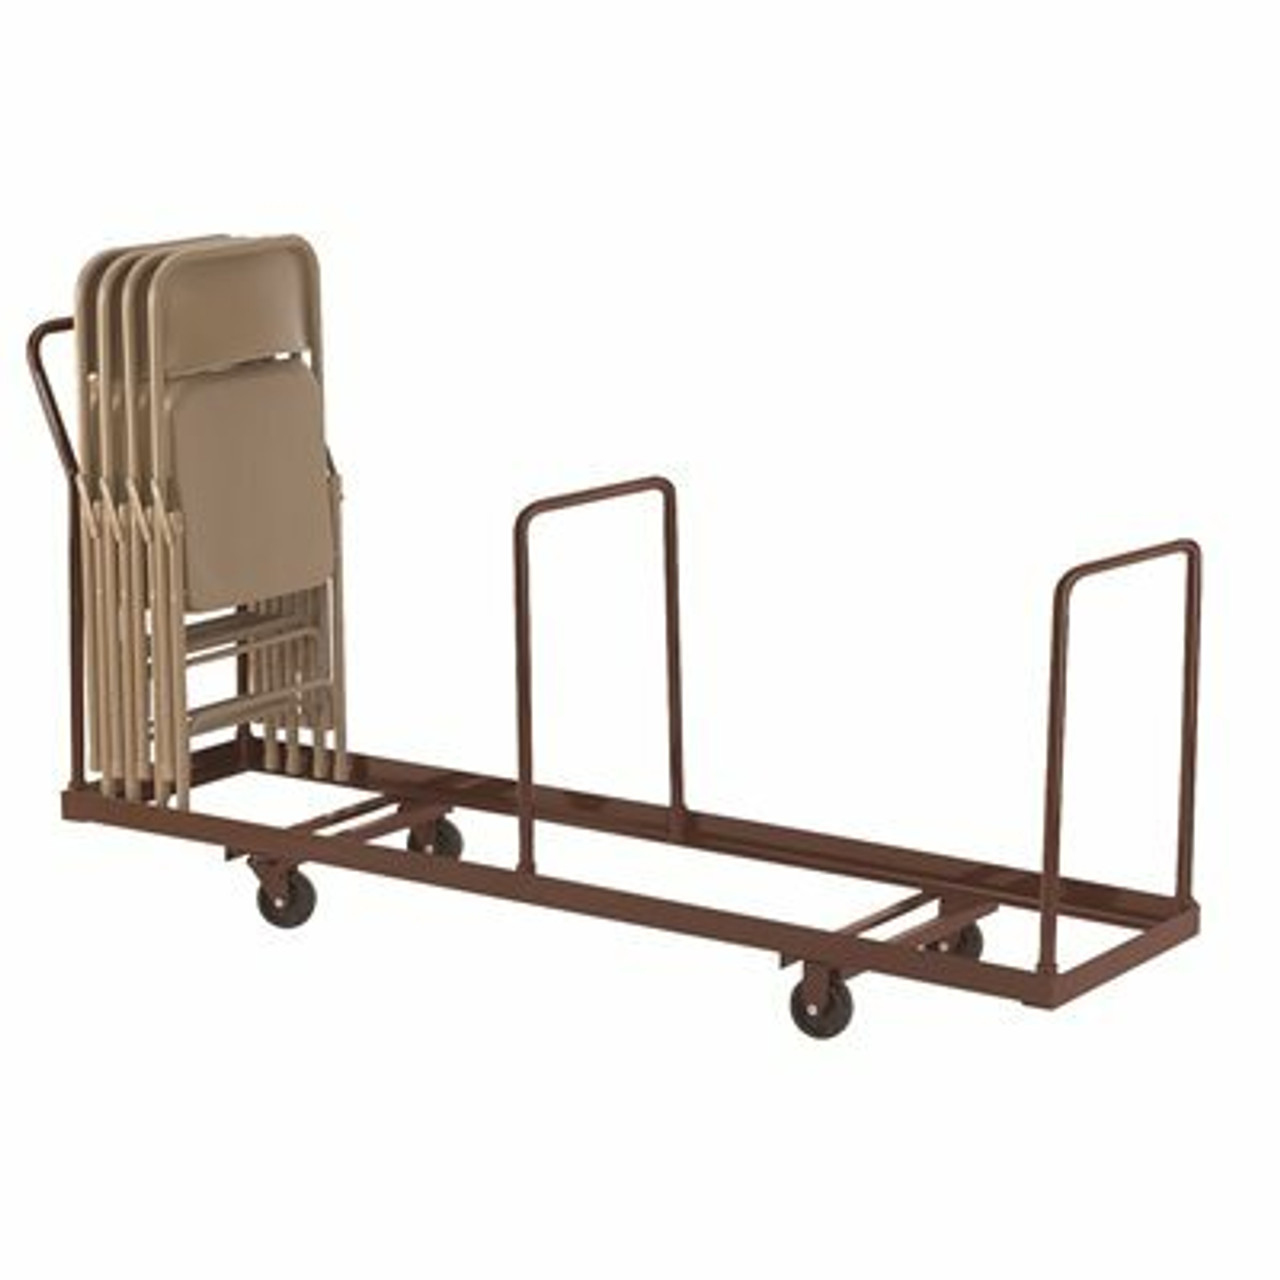 National Public Seating 1100 Lbs. Weight Capacity Folding Chair Dolly For Vertical Storage And Transport - 35 Chair Capacity